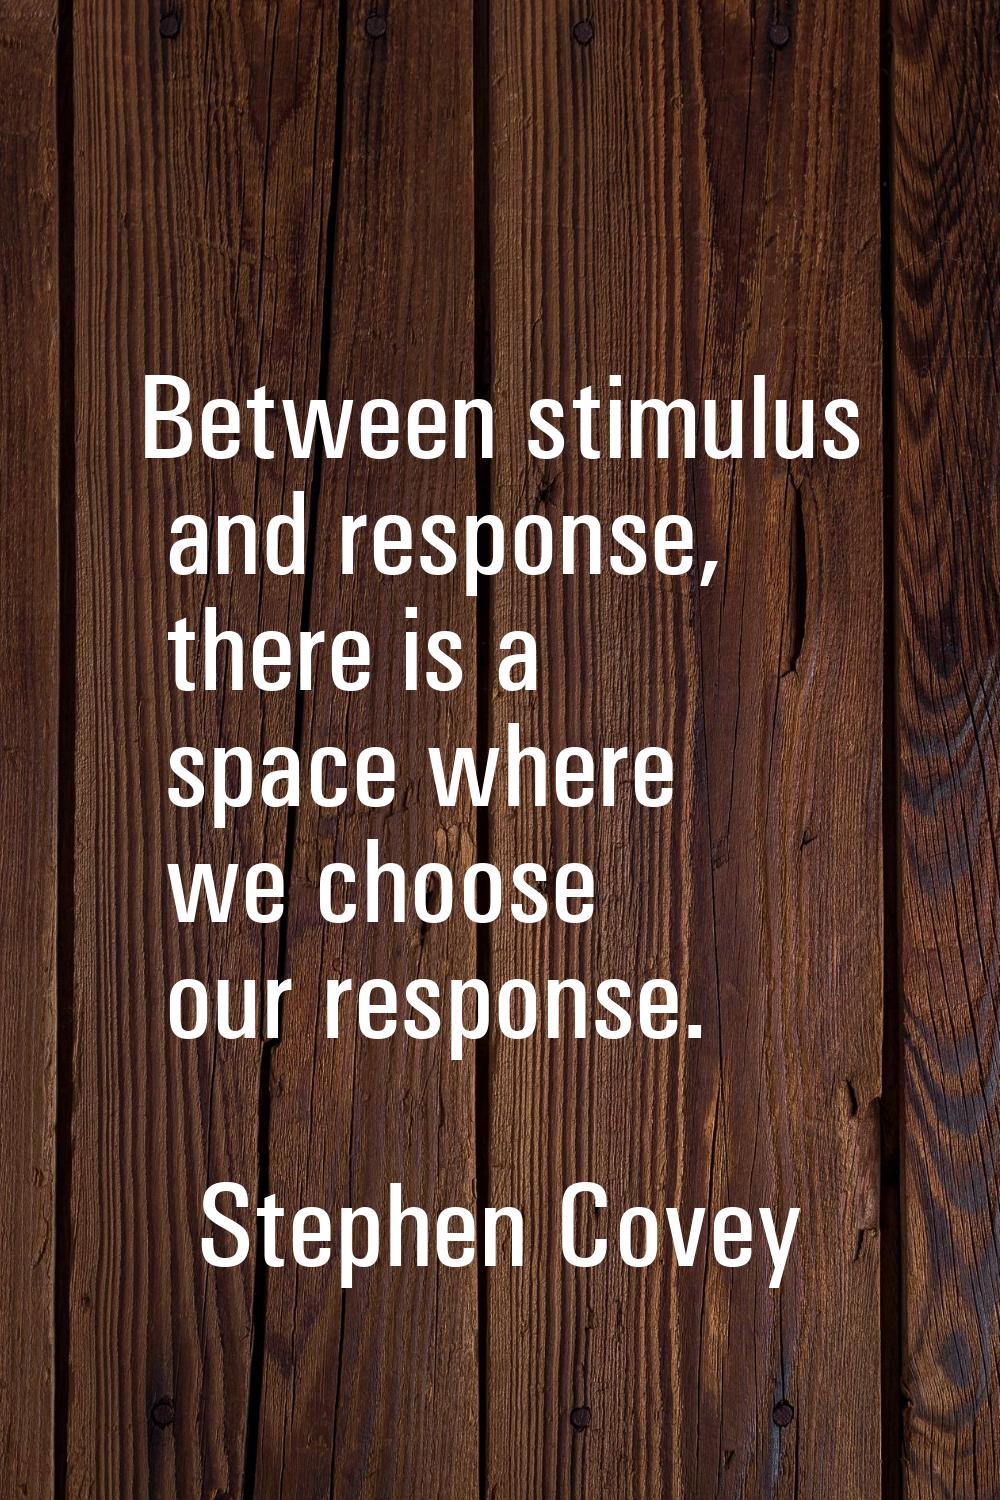 Between stimulus and response, there is a space where we choose our response.